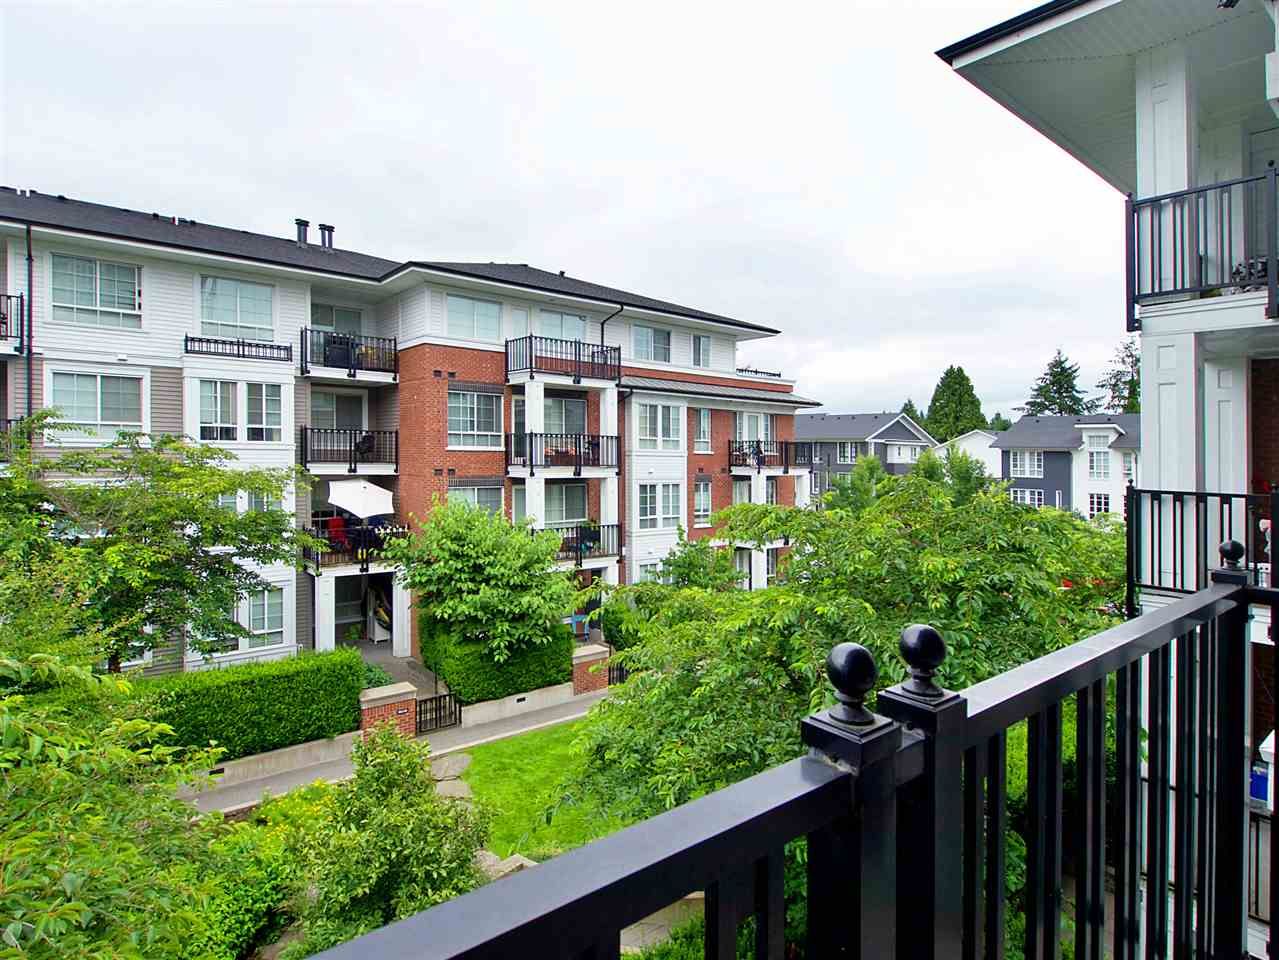 Main Photo: 312 553 FOSTER AVENUE in : Coquitlam West Condo for sale : MLS®# R2385324